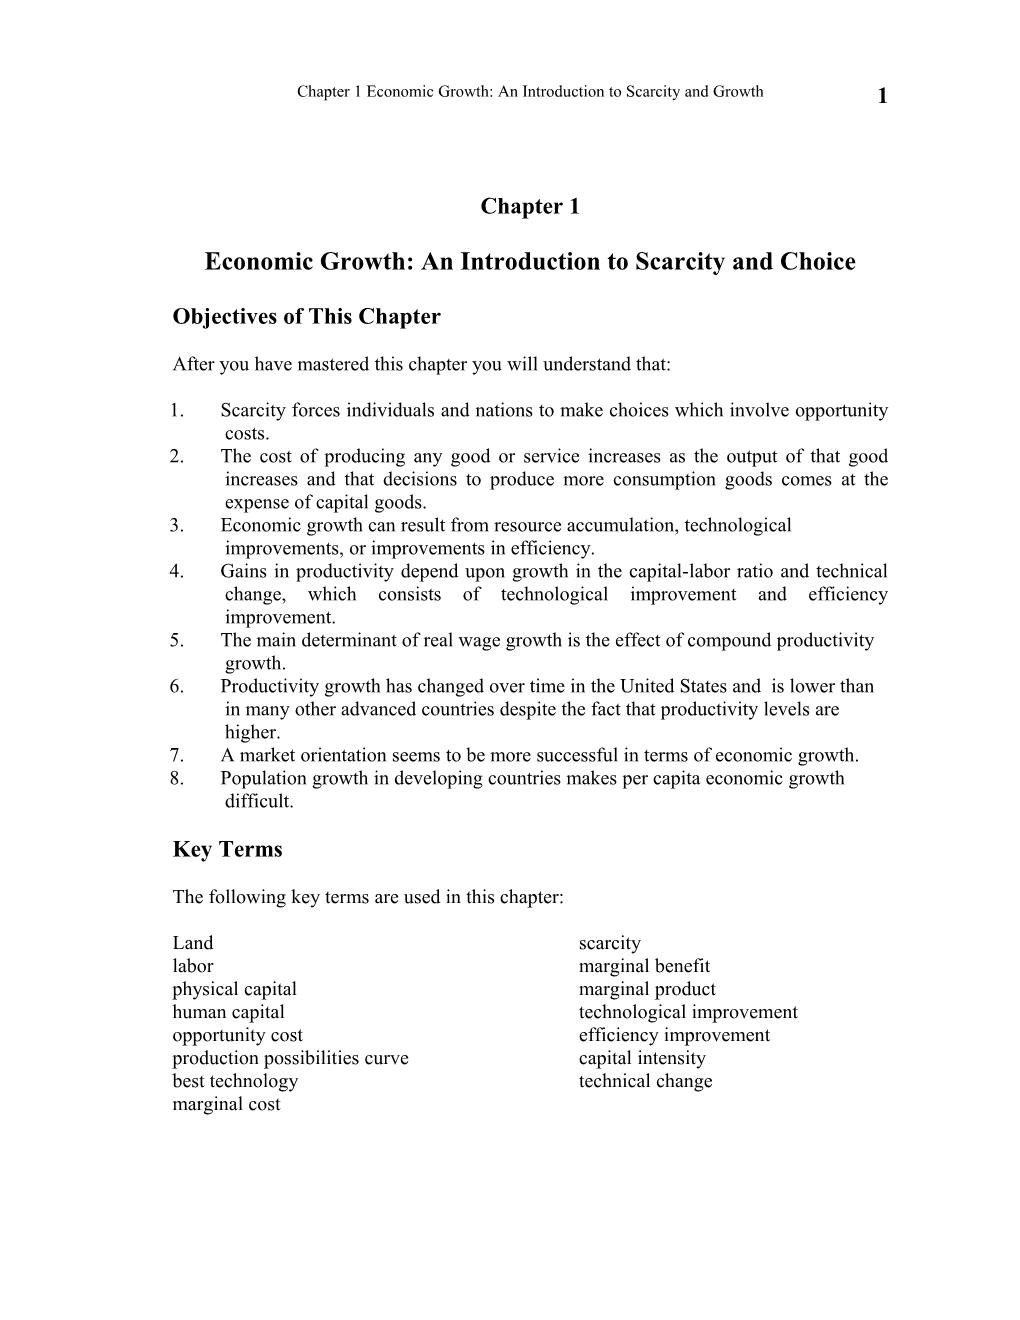 Economic Growth: an Introduction to Scarcity and Choice